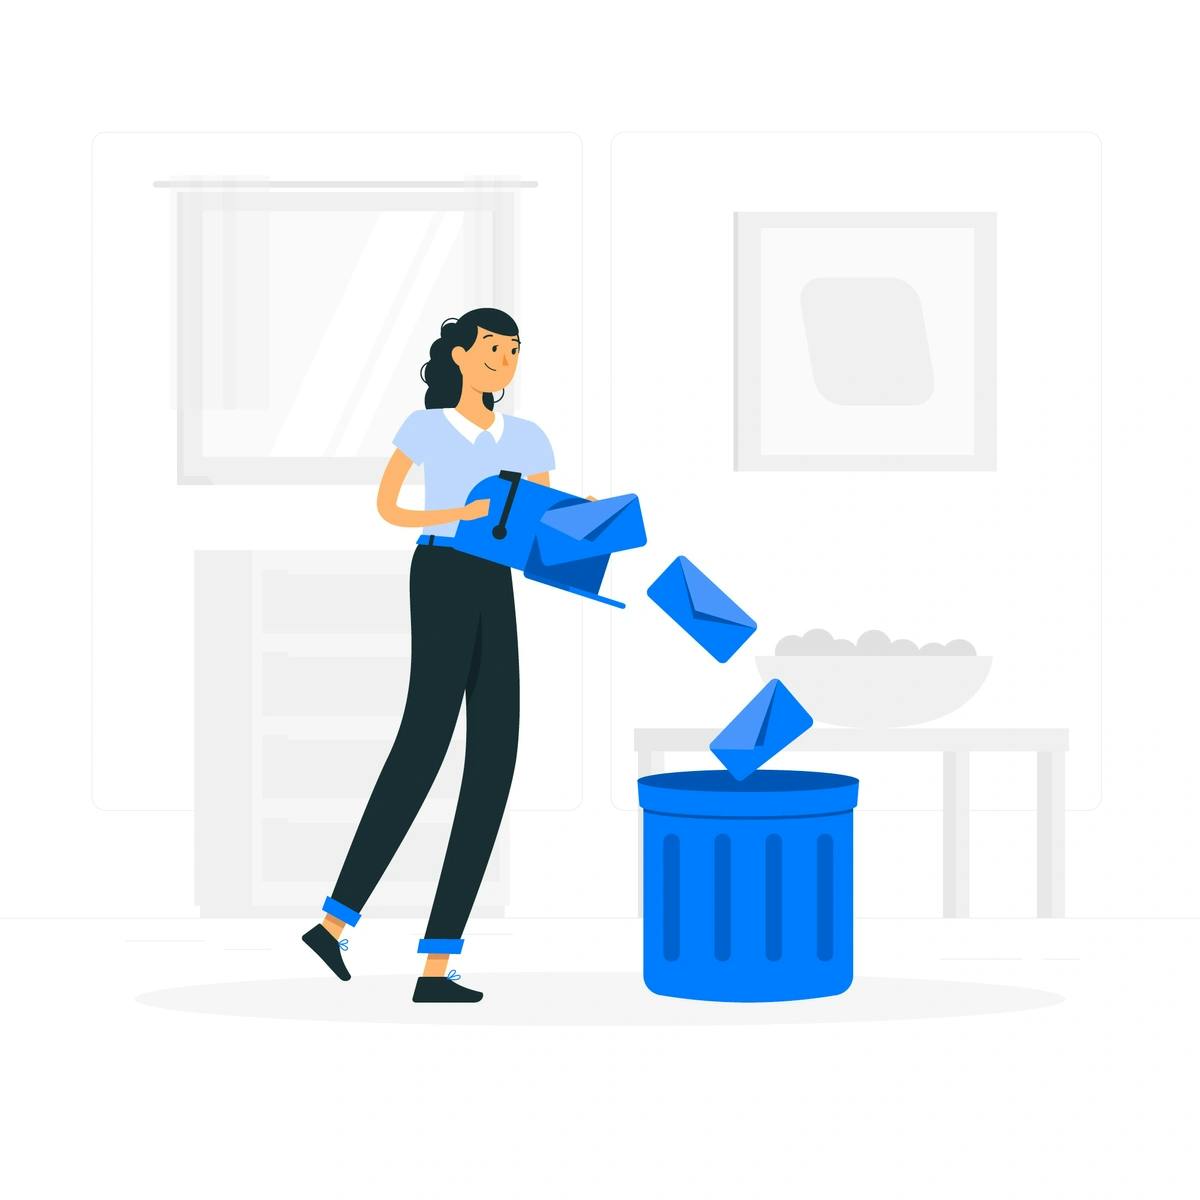 A person discarding code documents into a recycle bin, symbolizing the concept of starting anew with Forge for code development.